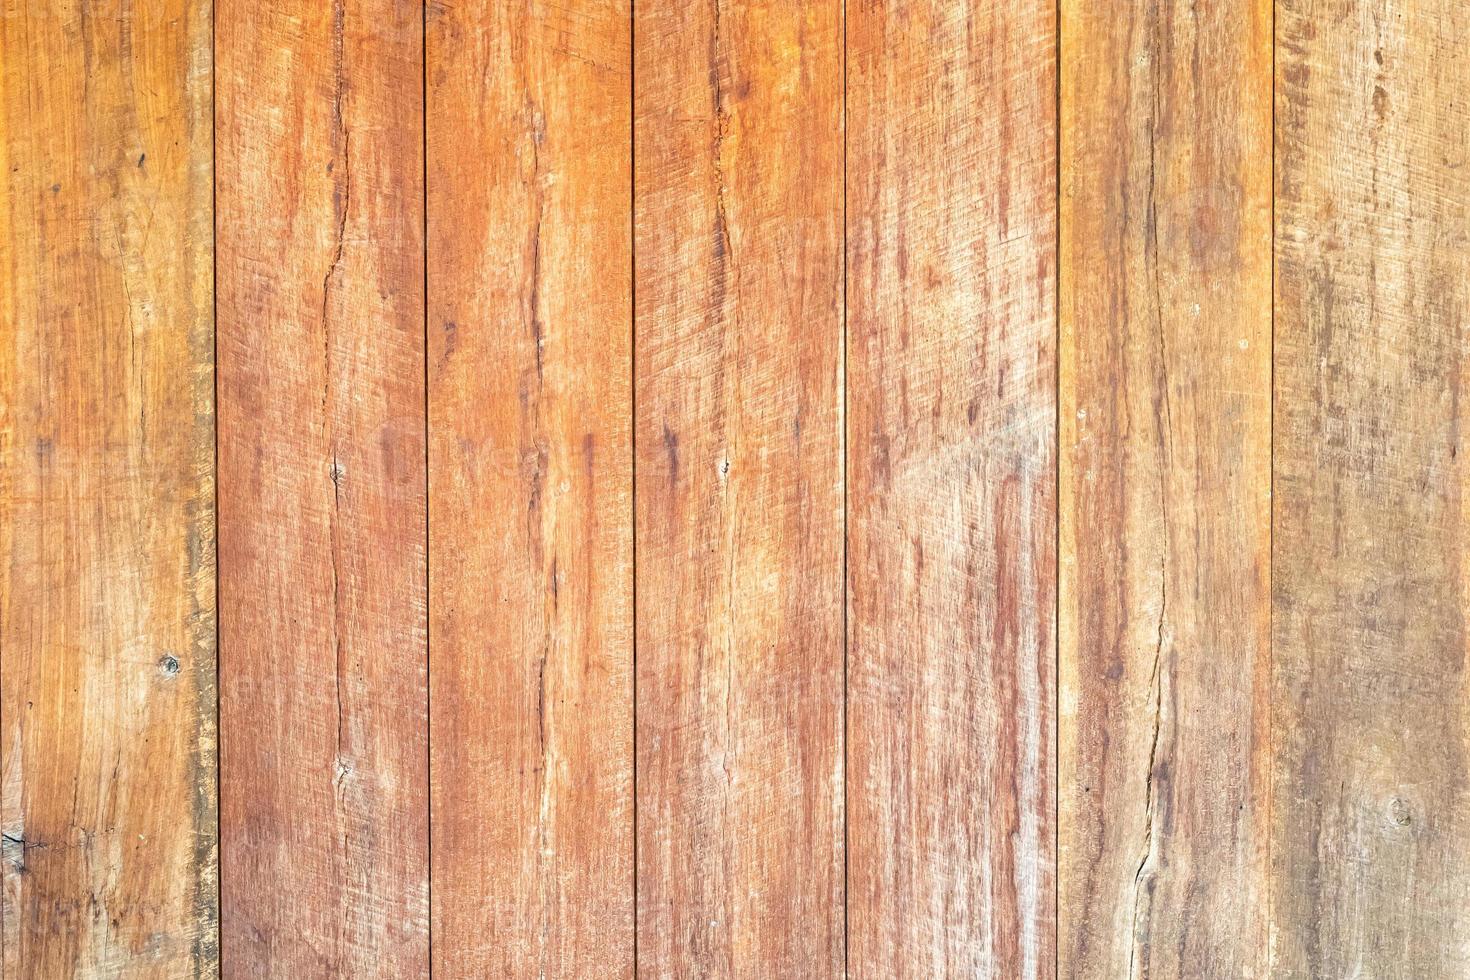 old rustic wood plank wall texture background photo